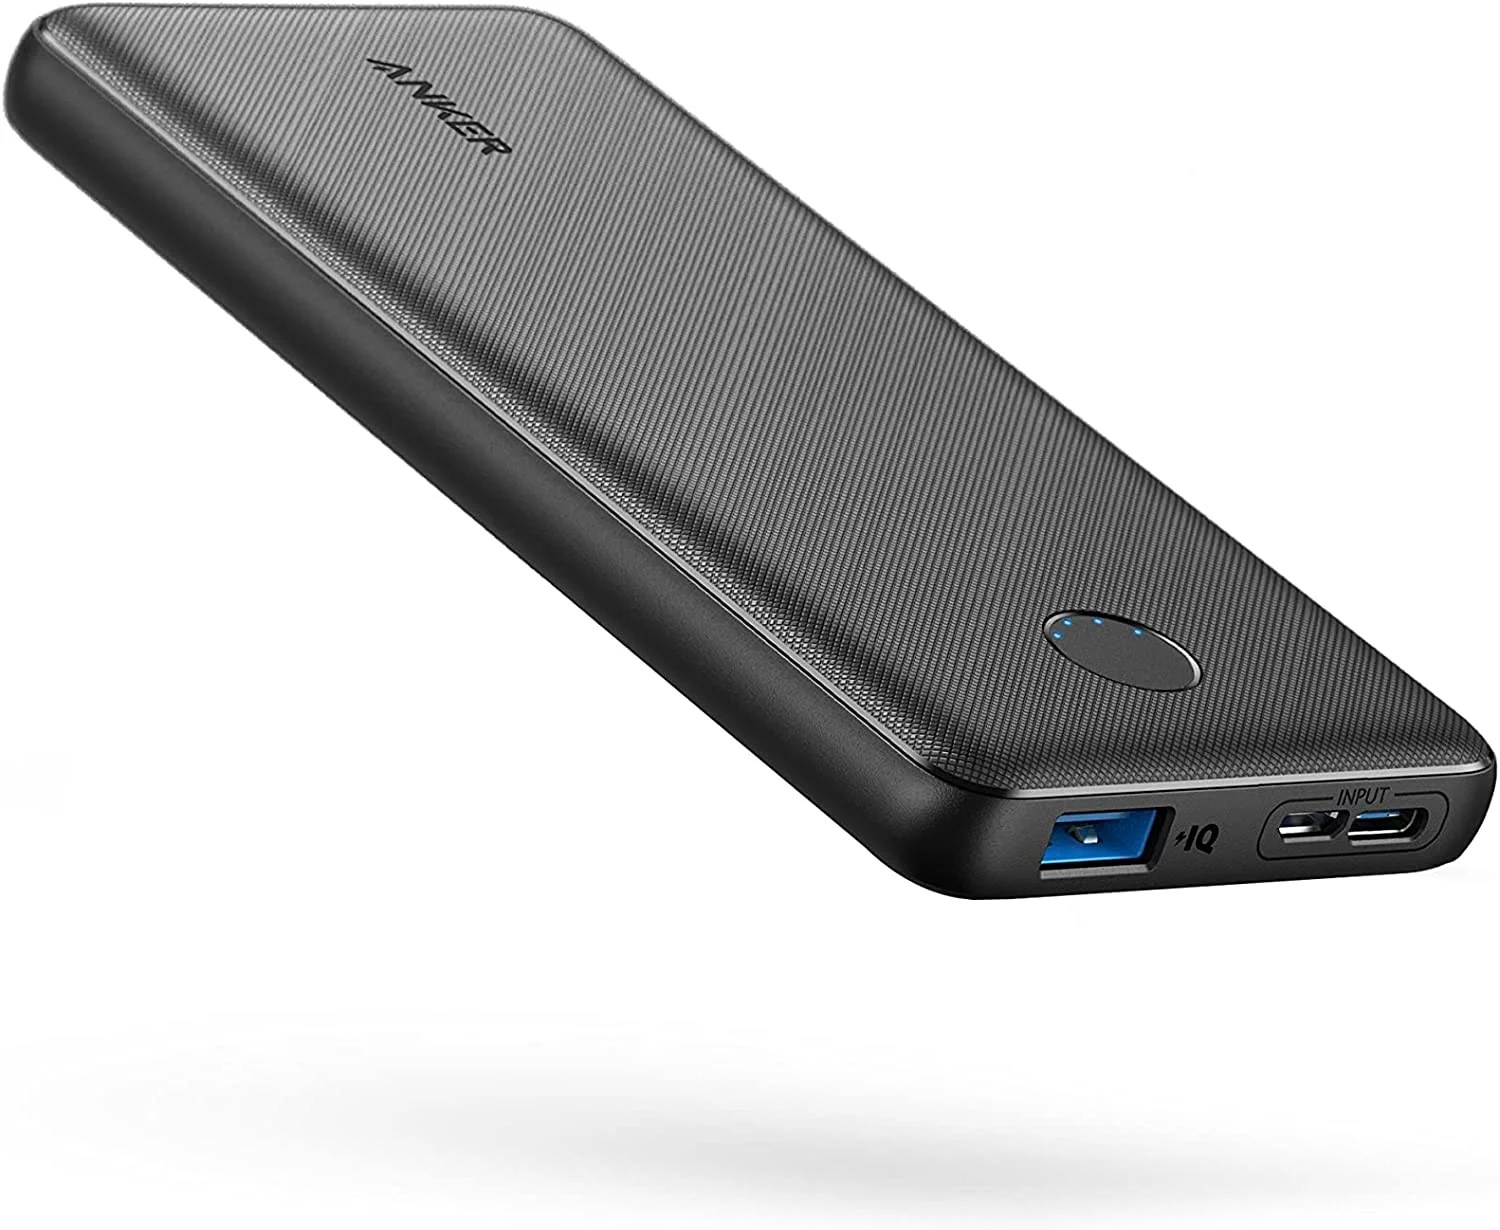 anker portable charger